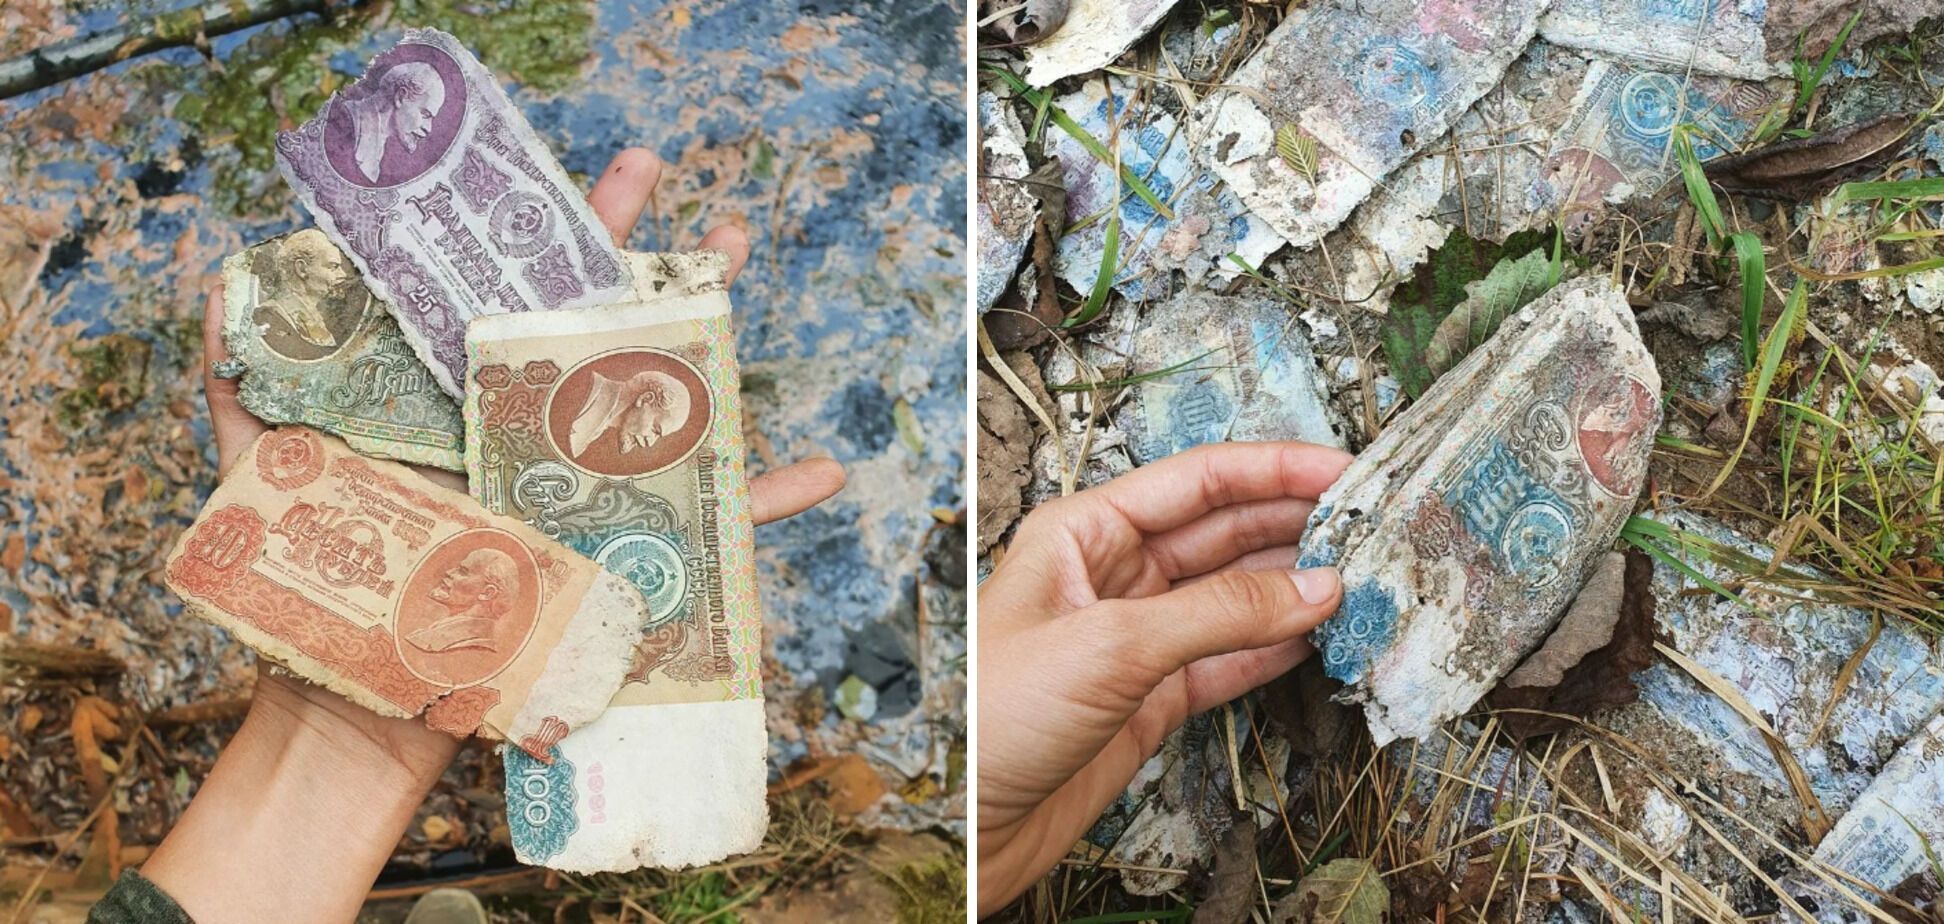 Soviet rubles became trash: where untold ''riches'' of the USSR times are buried